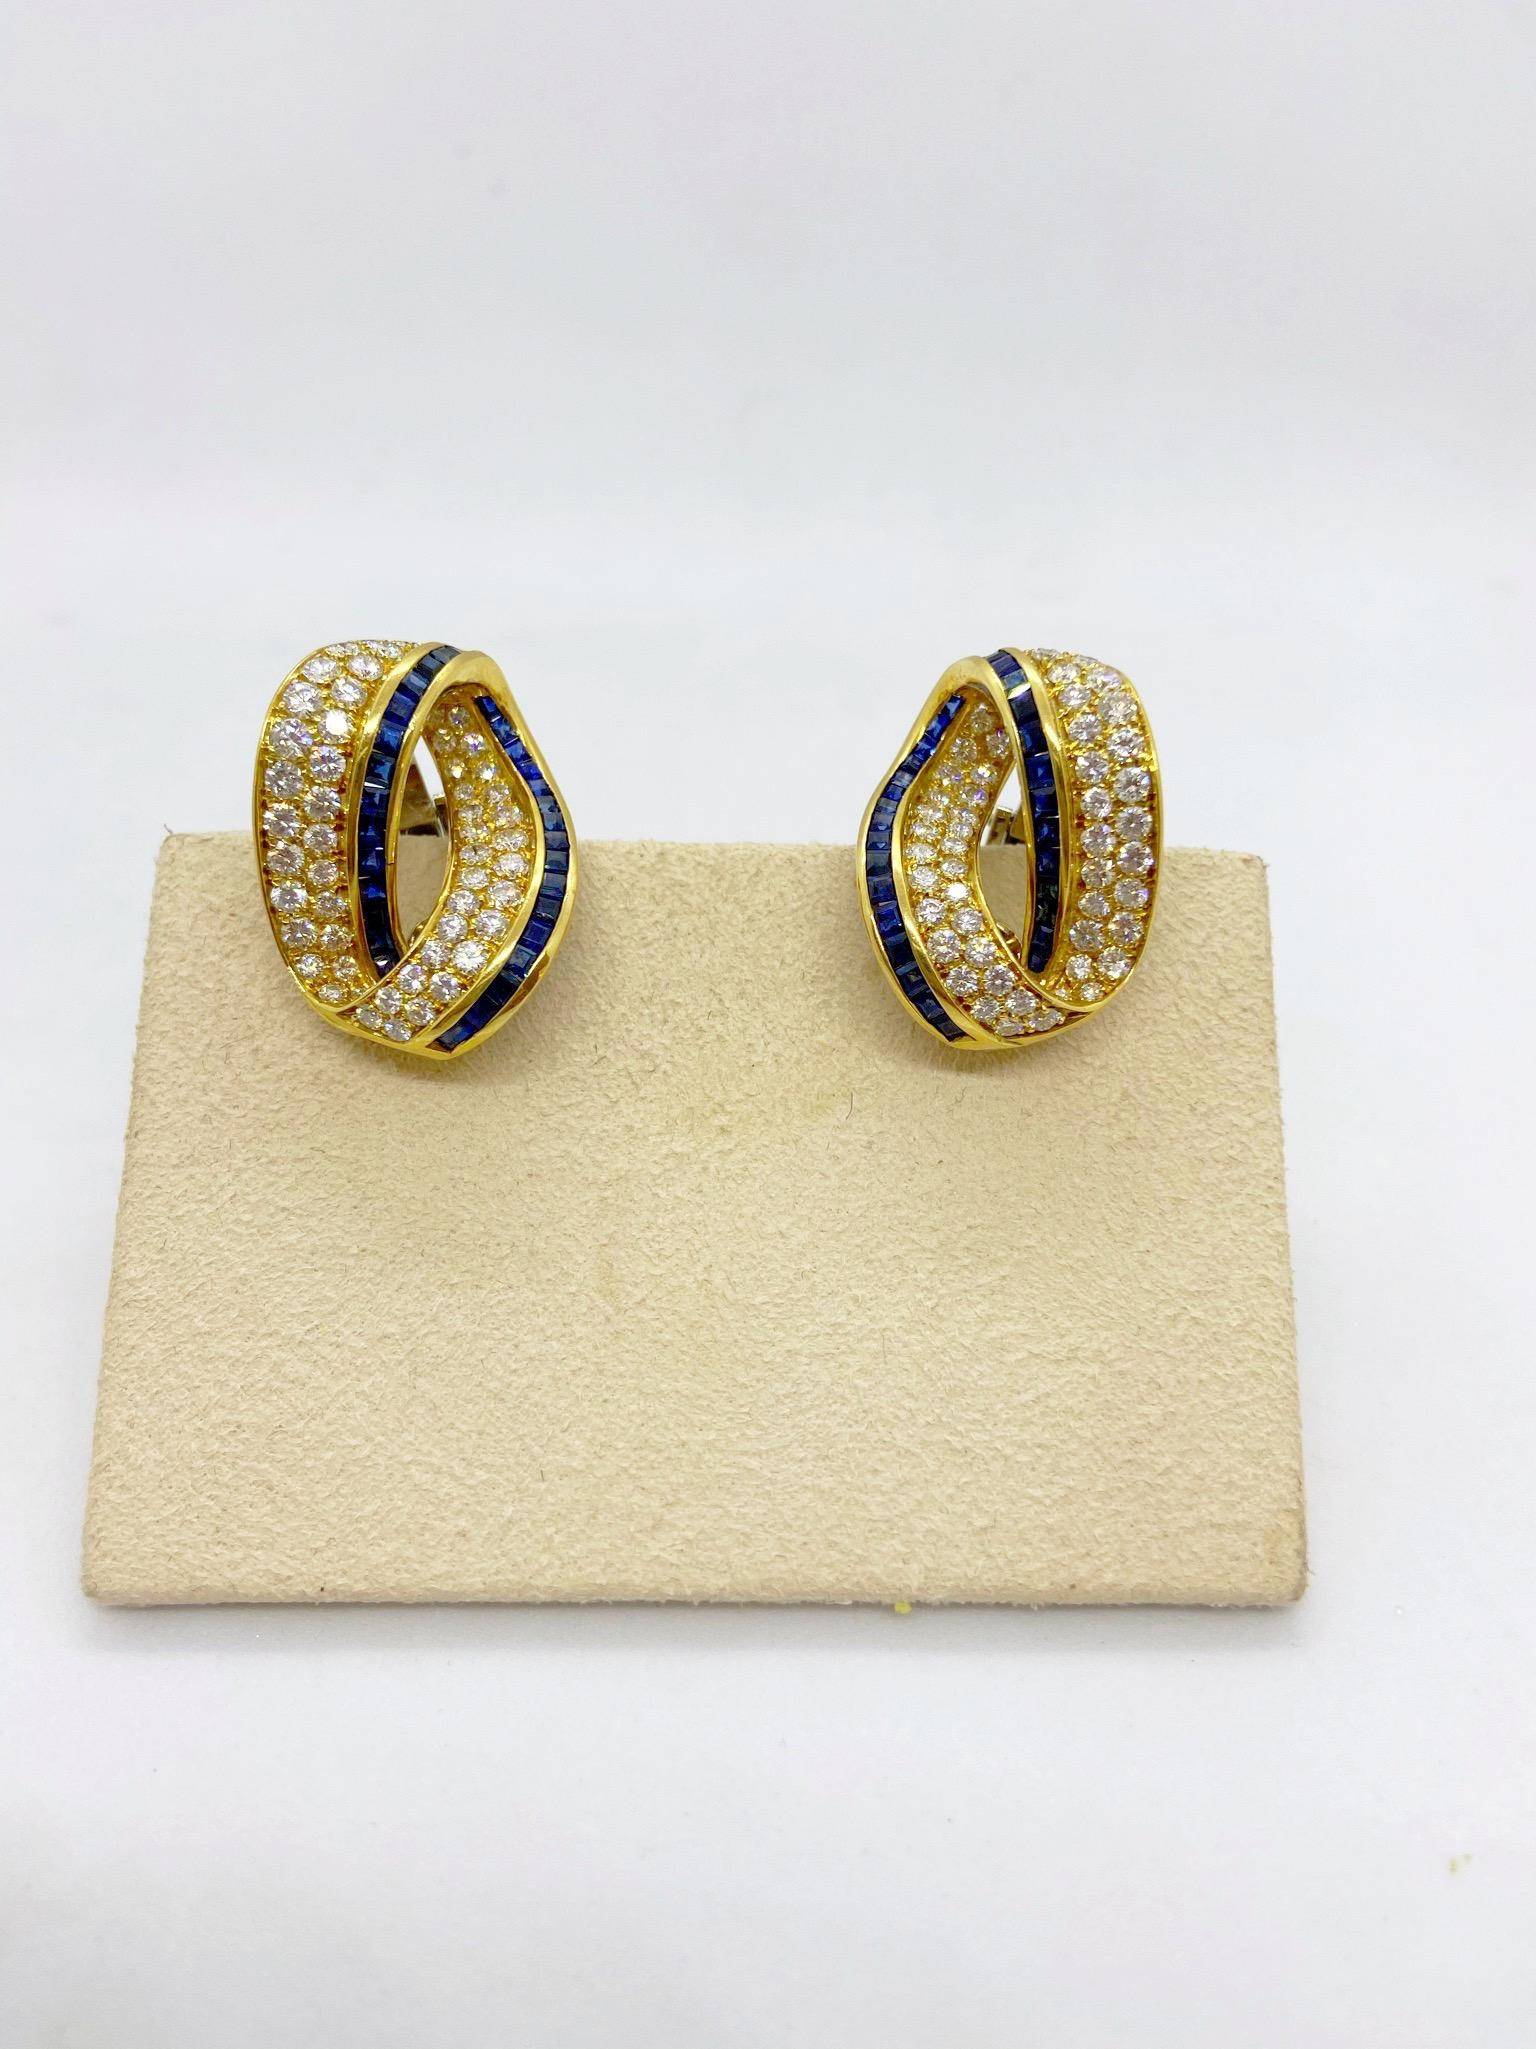 Contemporary Cellini 18KT Gold 2.39 Carat Diamond and 2.59 Carat Sapphire Infinity Earrings For Sale